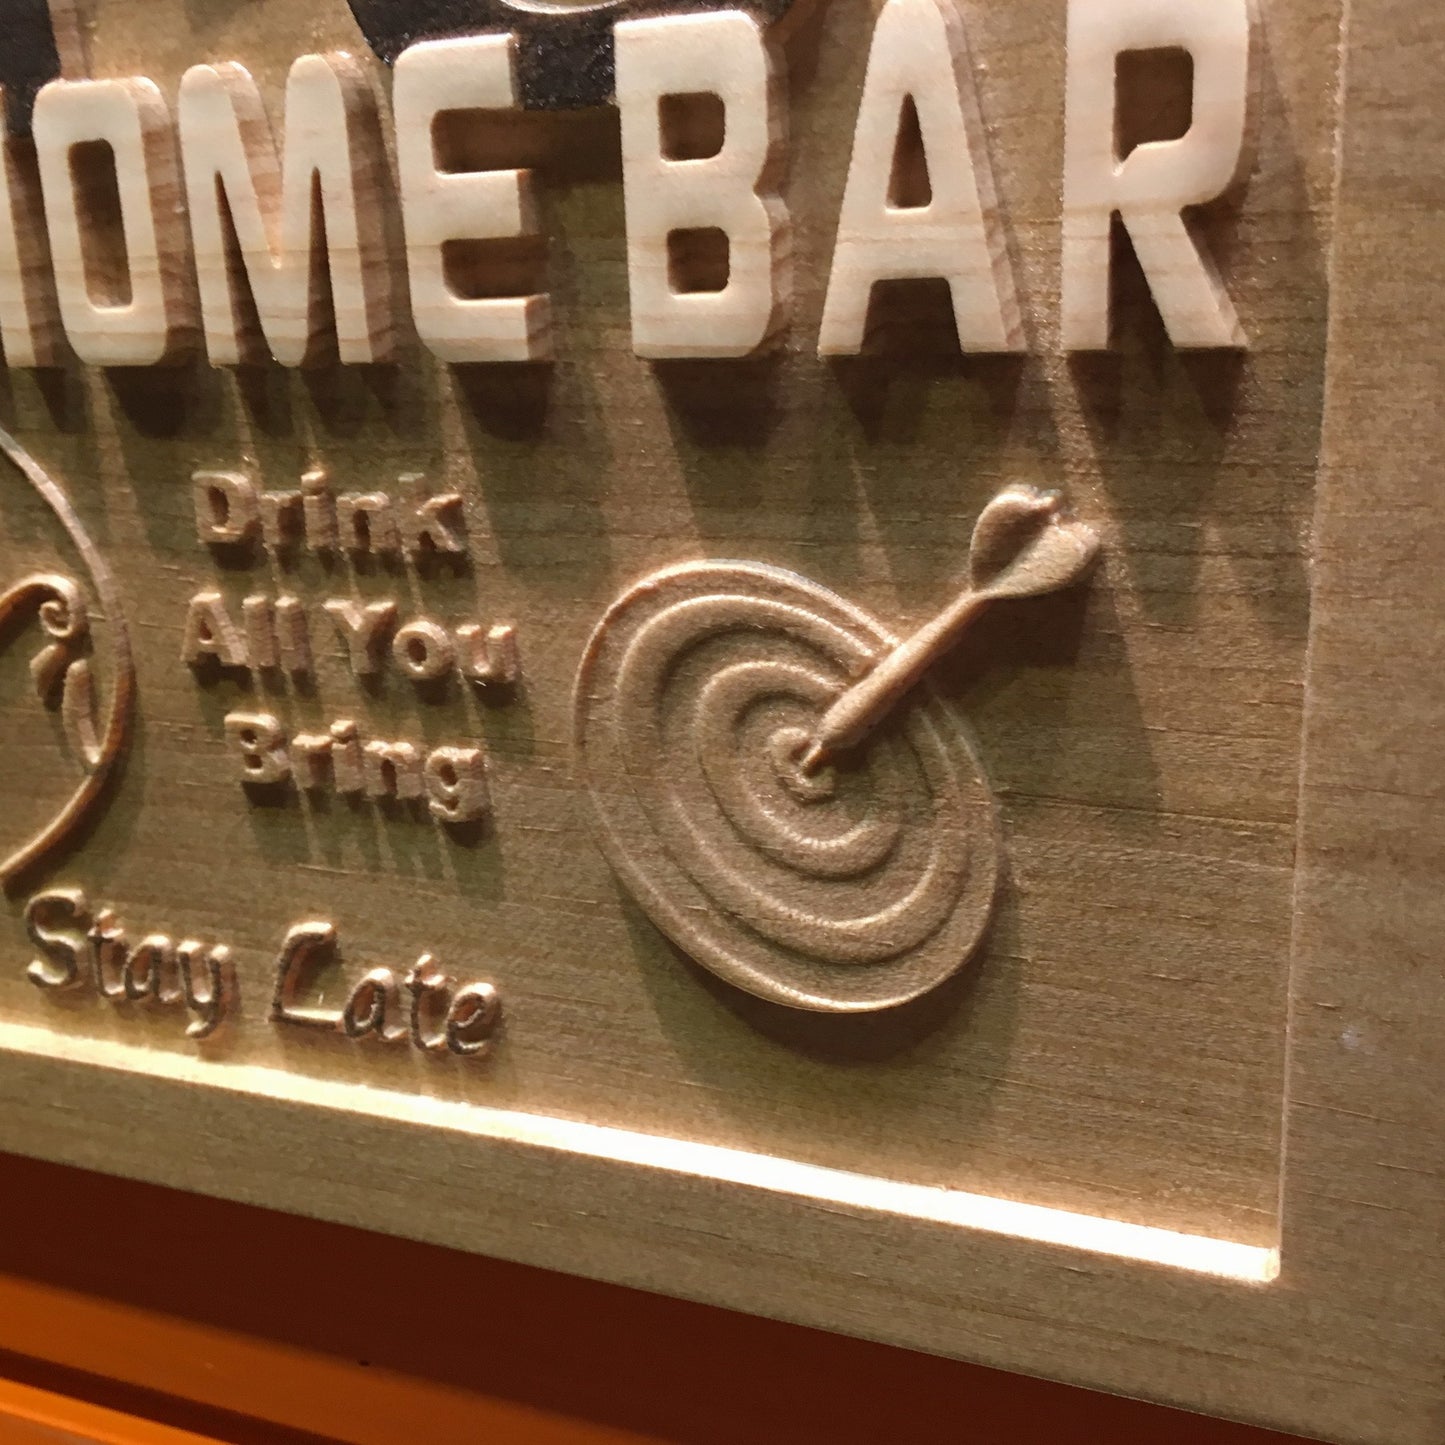 Home Bar Man Cave  3D Wooden Signs by Woody Signs Co. - Handmade Crafted Unique Wooden Creative